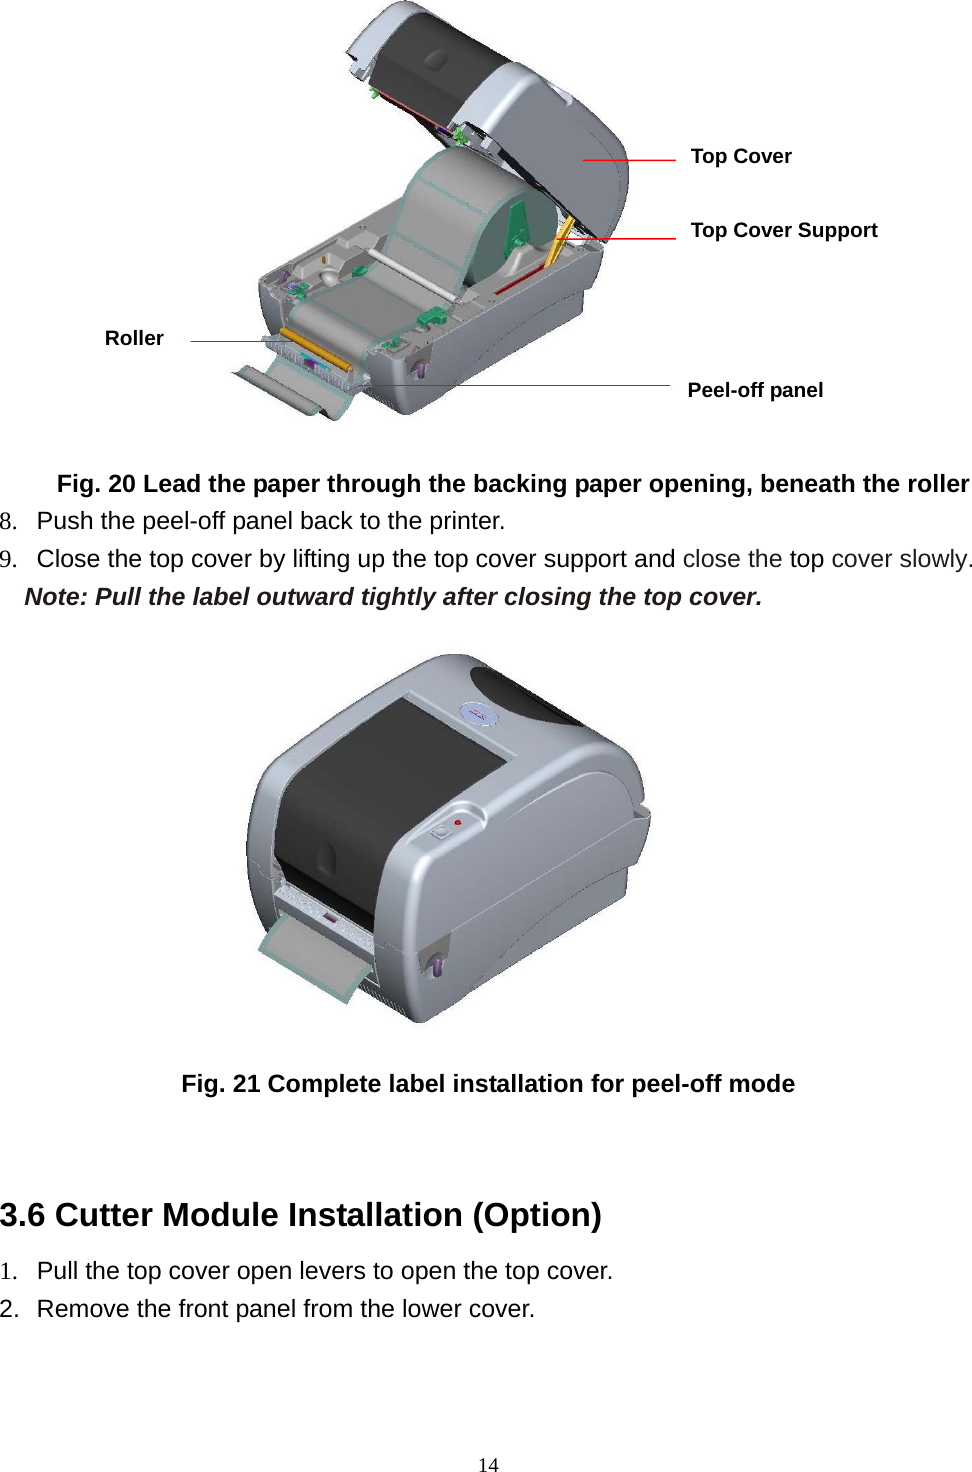  14           Fig. 20 Lead the paper through the backing paper opening, beneath the roller 8.  Push the peel-off panel back to the printer. 9.  Close the top cover by lifting up the top cover support and close the top cover slowly. Note: Pull the label outward tightly after closing the top cover.           Fig. 21 Complete label installation for peel-off mode   3.6 Cutter Module Installation (Option) 1.  Pull the top cover open levers to open the top cover.   2.  Remove the front panel from the lower cover.   Roller Top Cover  Top Cover Support Peel-off panel 